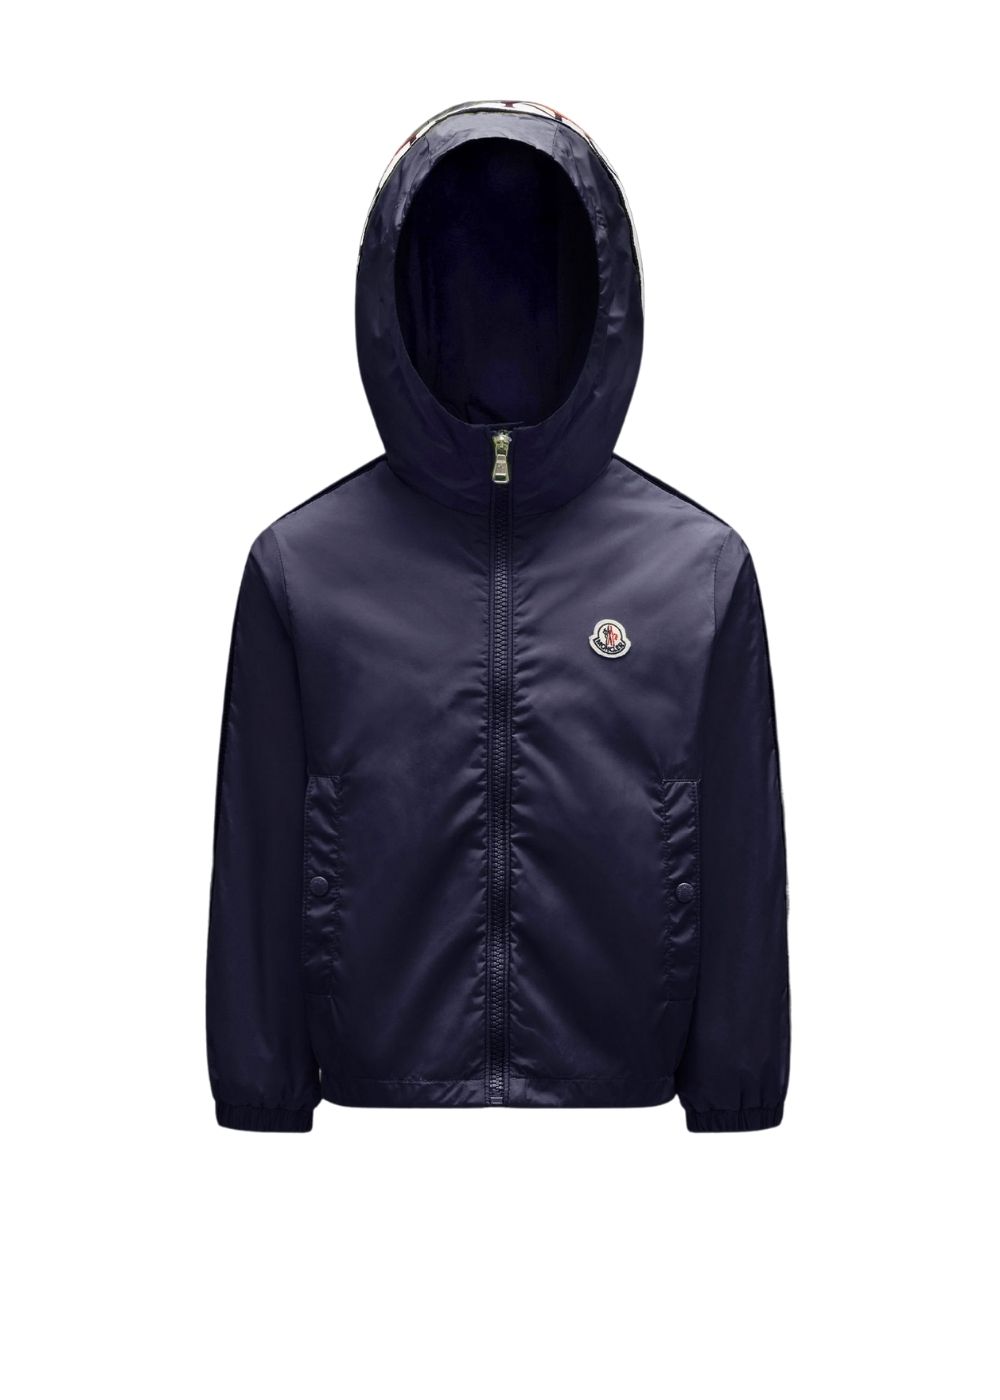 Featured image for “Moncler Giacca Impermeabile Hattab”